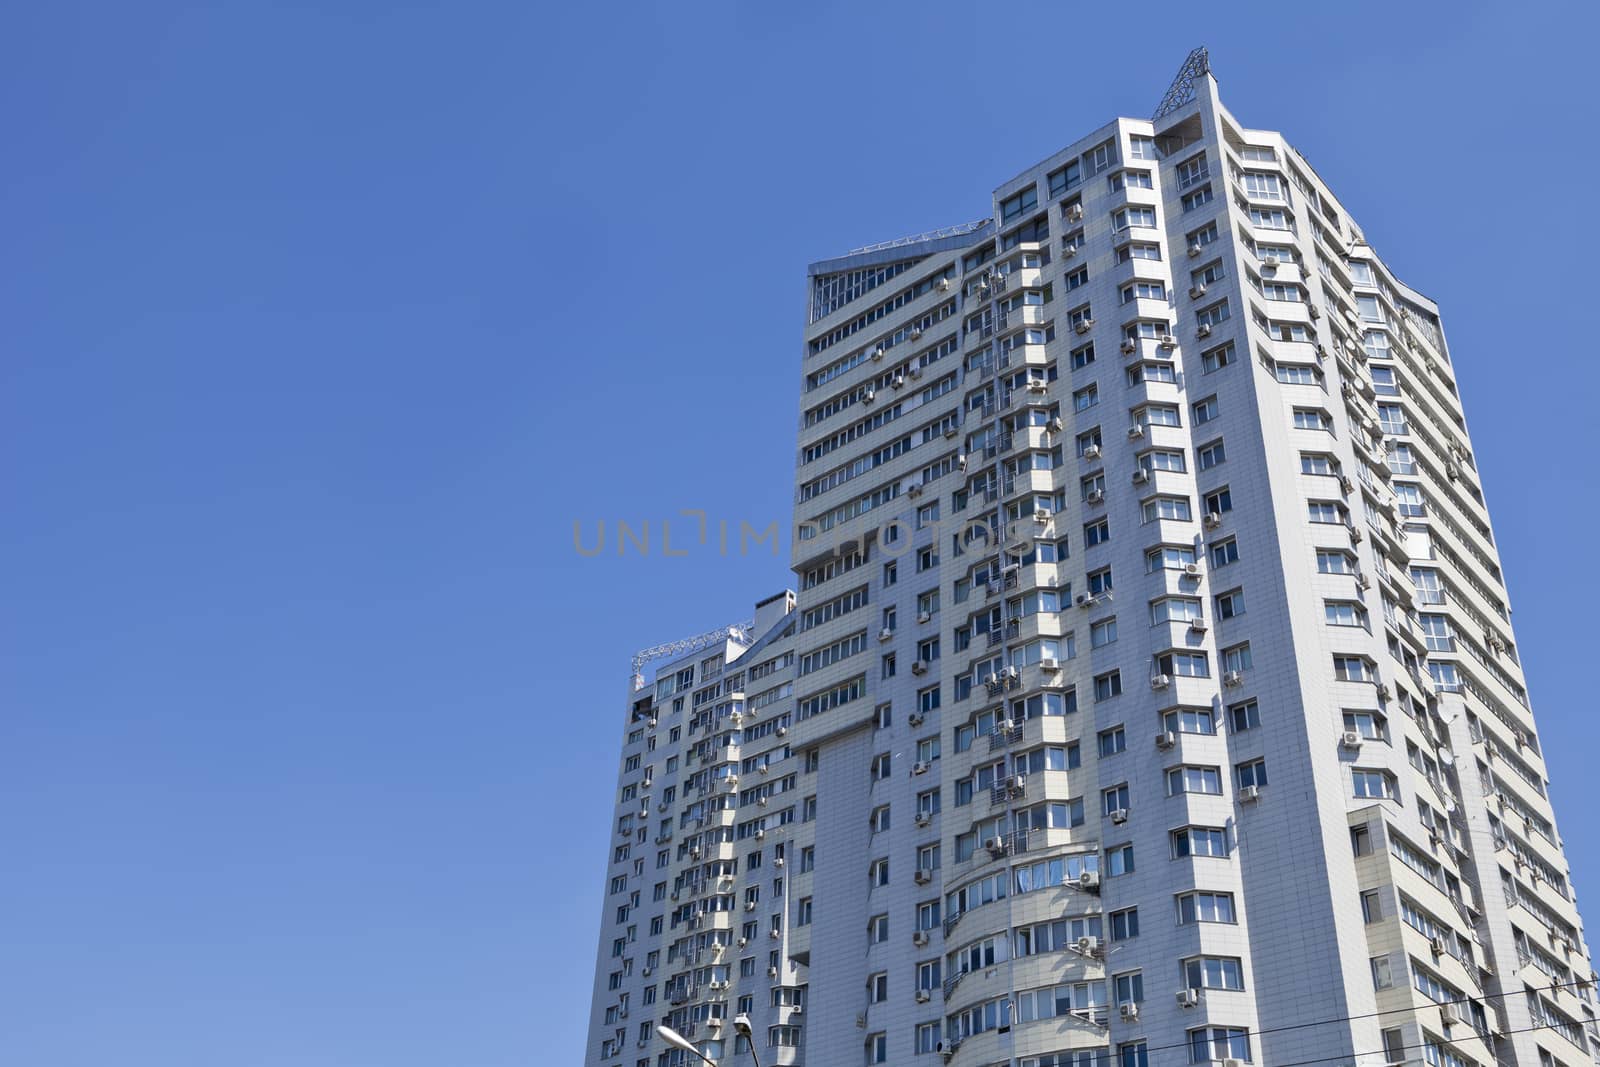 Real estate. Large multi-storey building on a blue sky